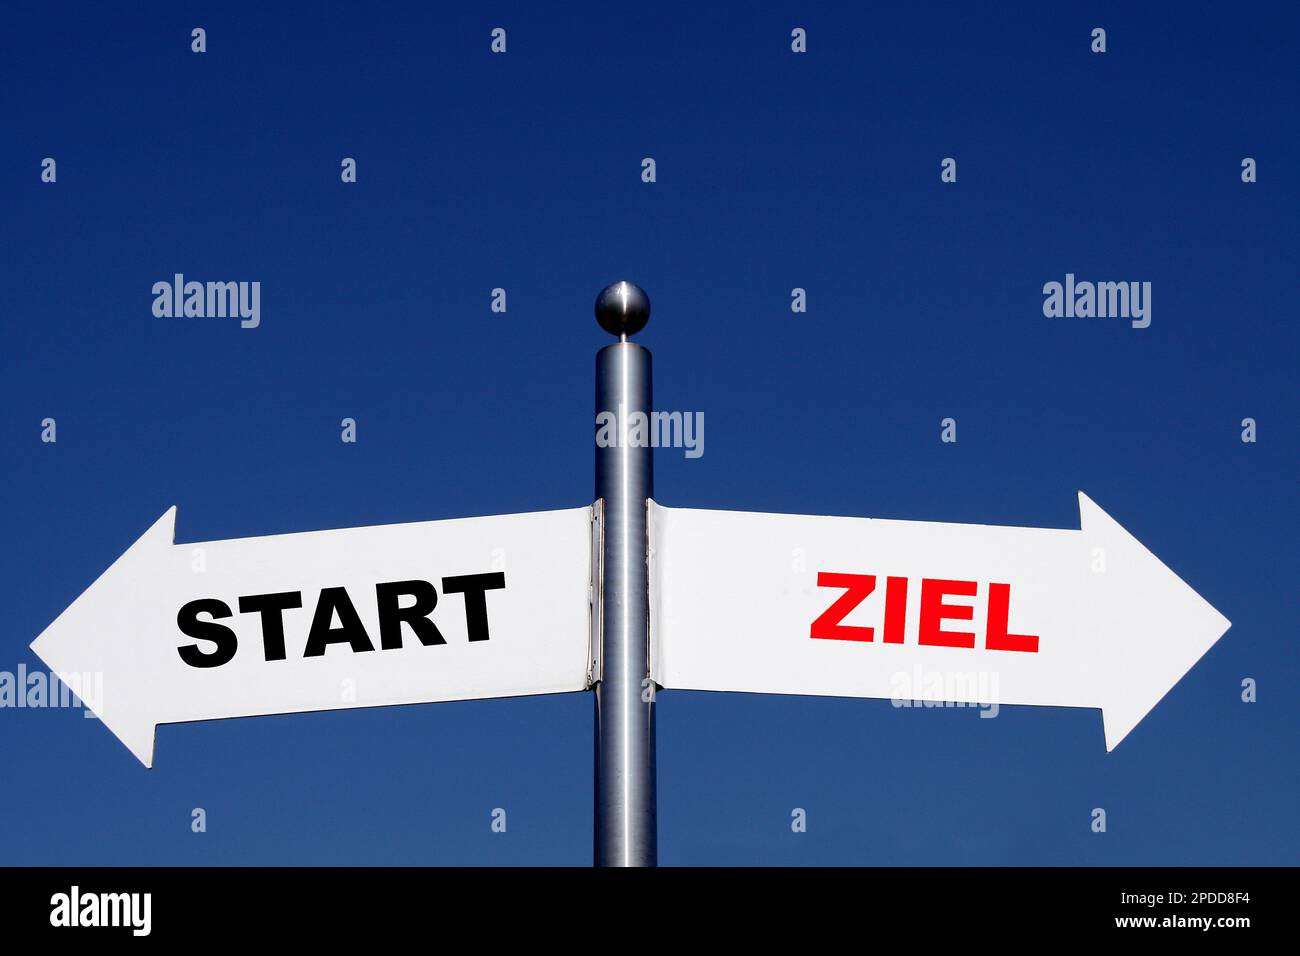 signposts pointing in different directions, options Start - Ziel, start - destination Stock Photo